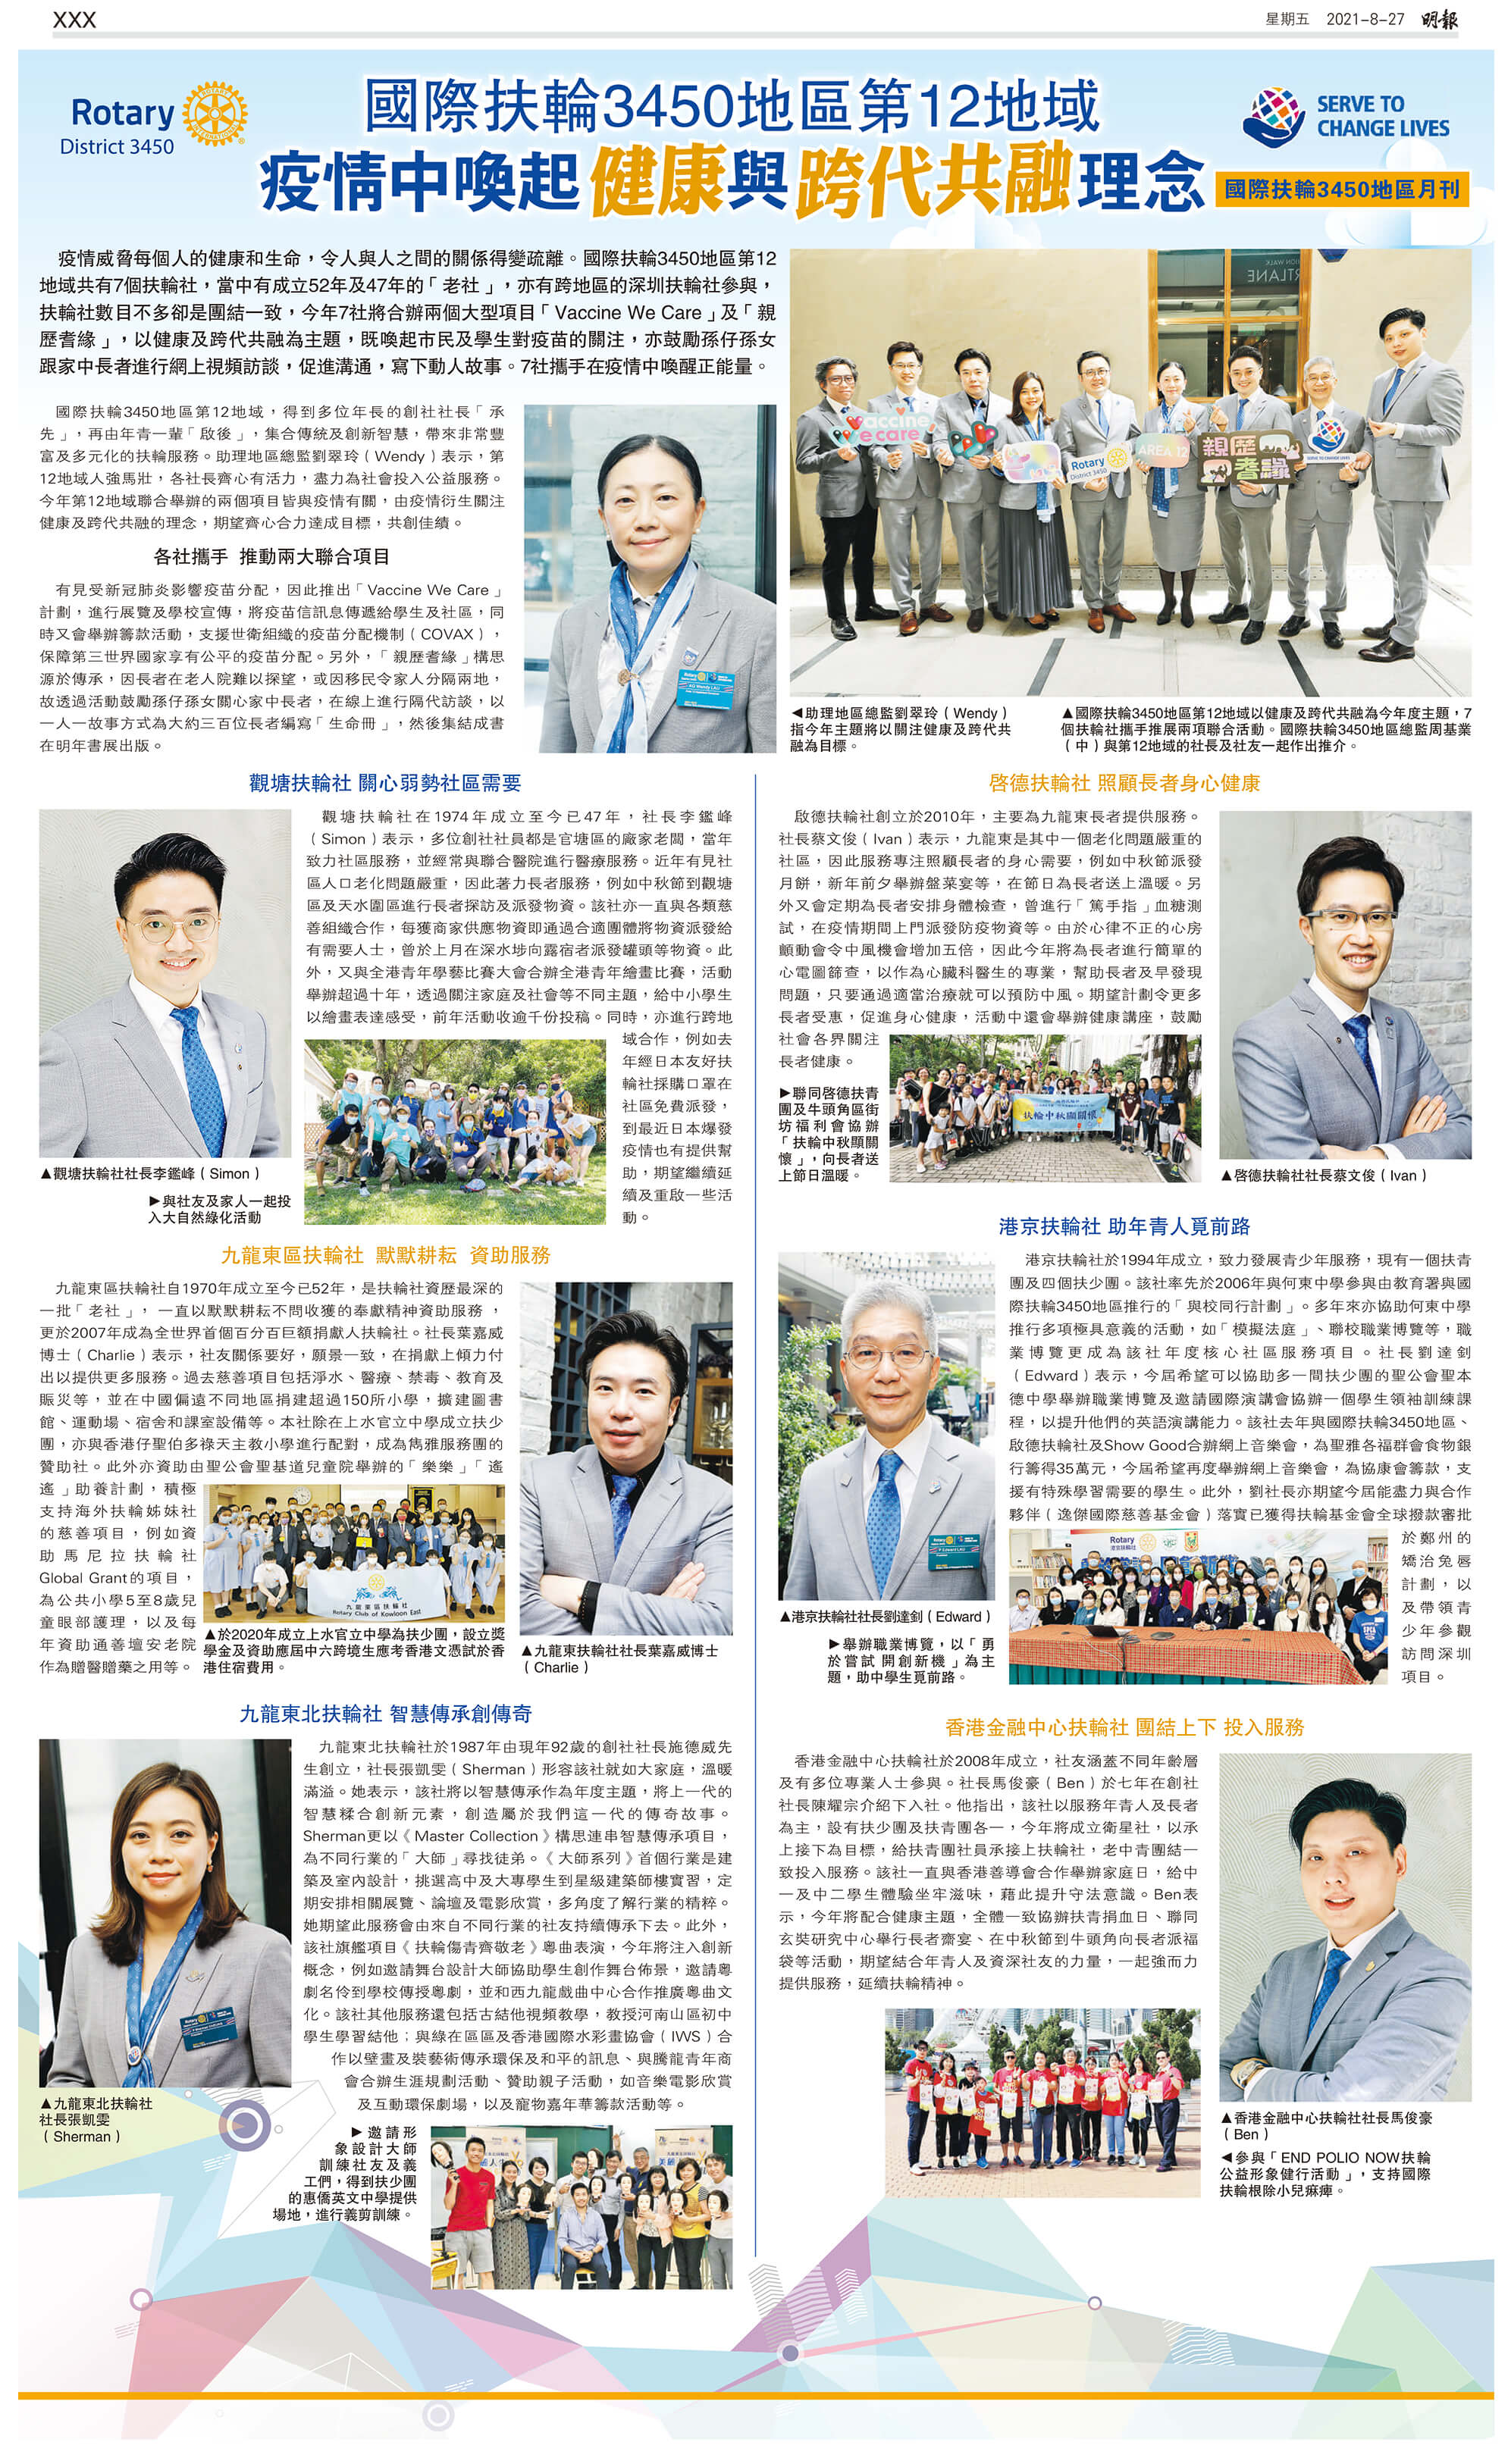 Area 12 Ming Pao interview